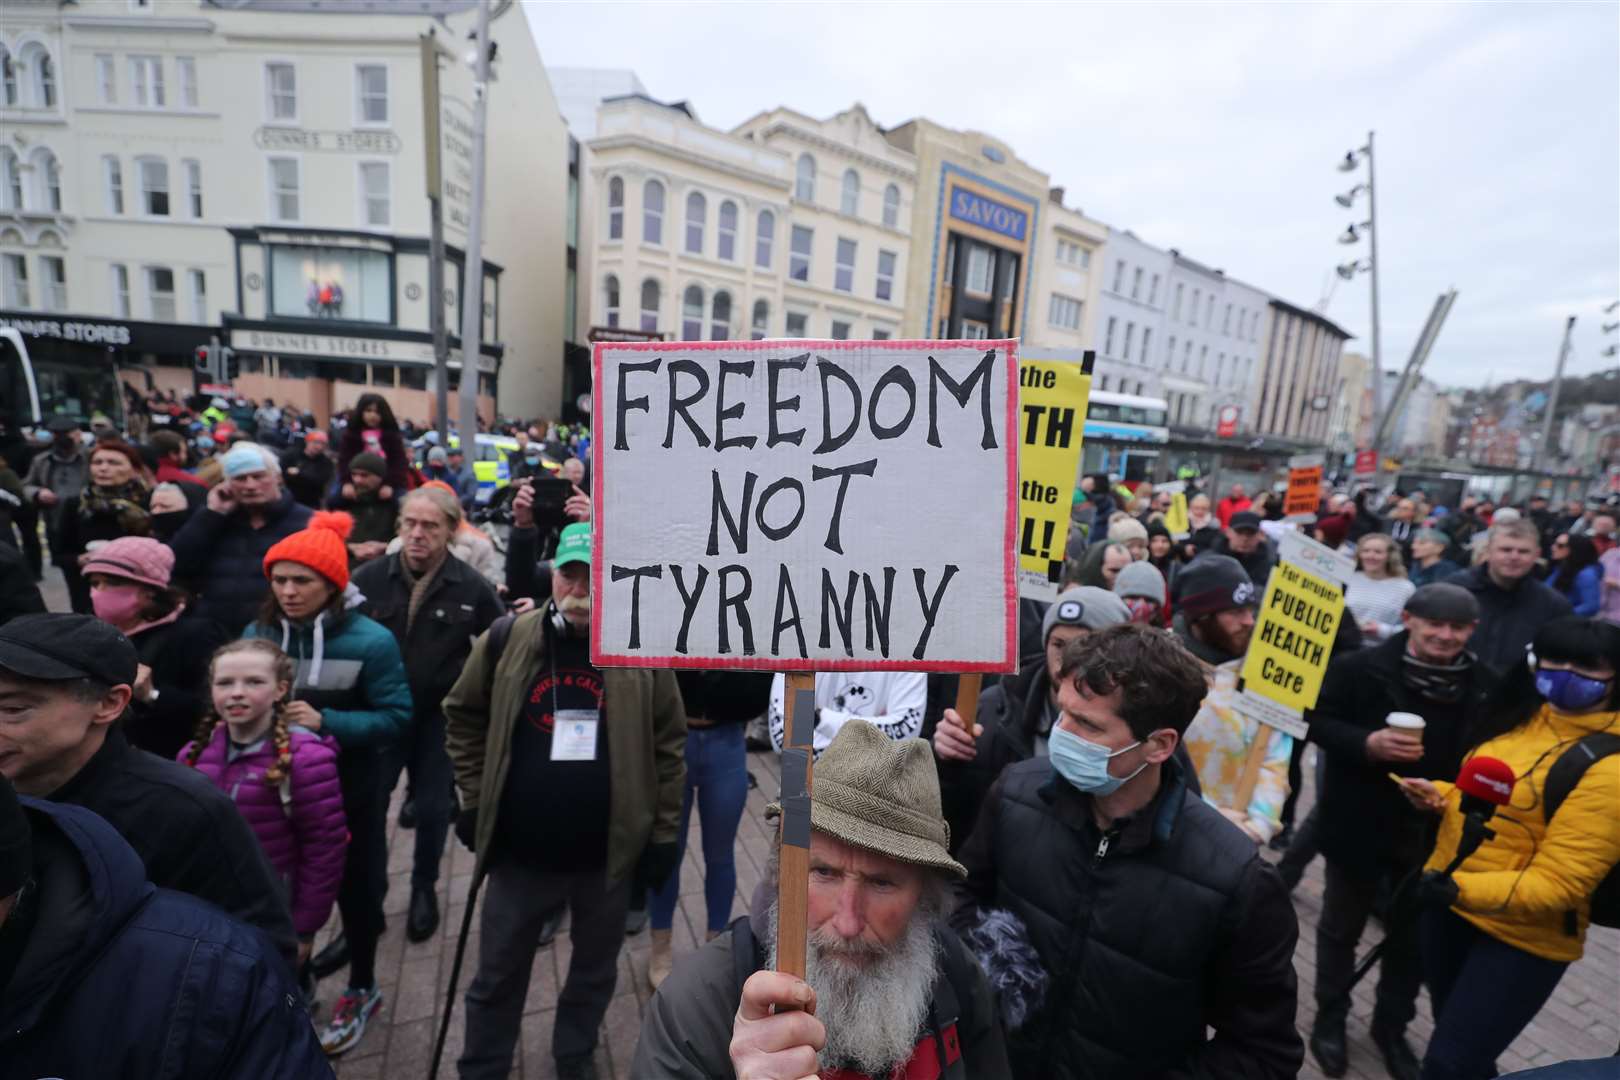 People part in a demonstration against lockdown restrictions organised by the People’s Convention in Cork city centre (Niall Carson/PA)